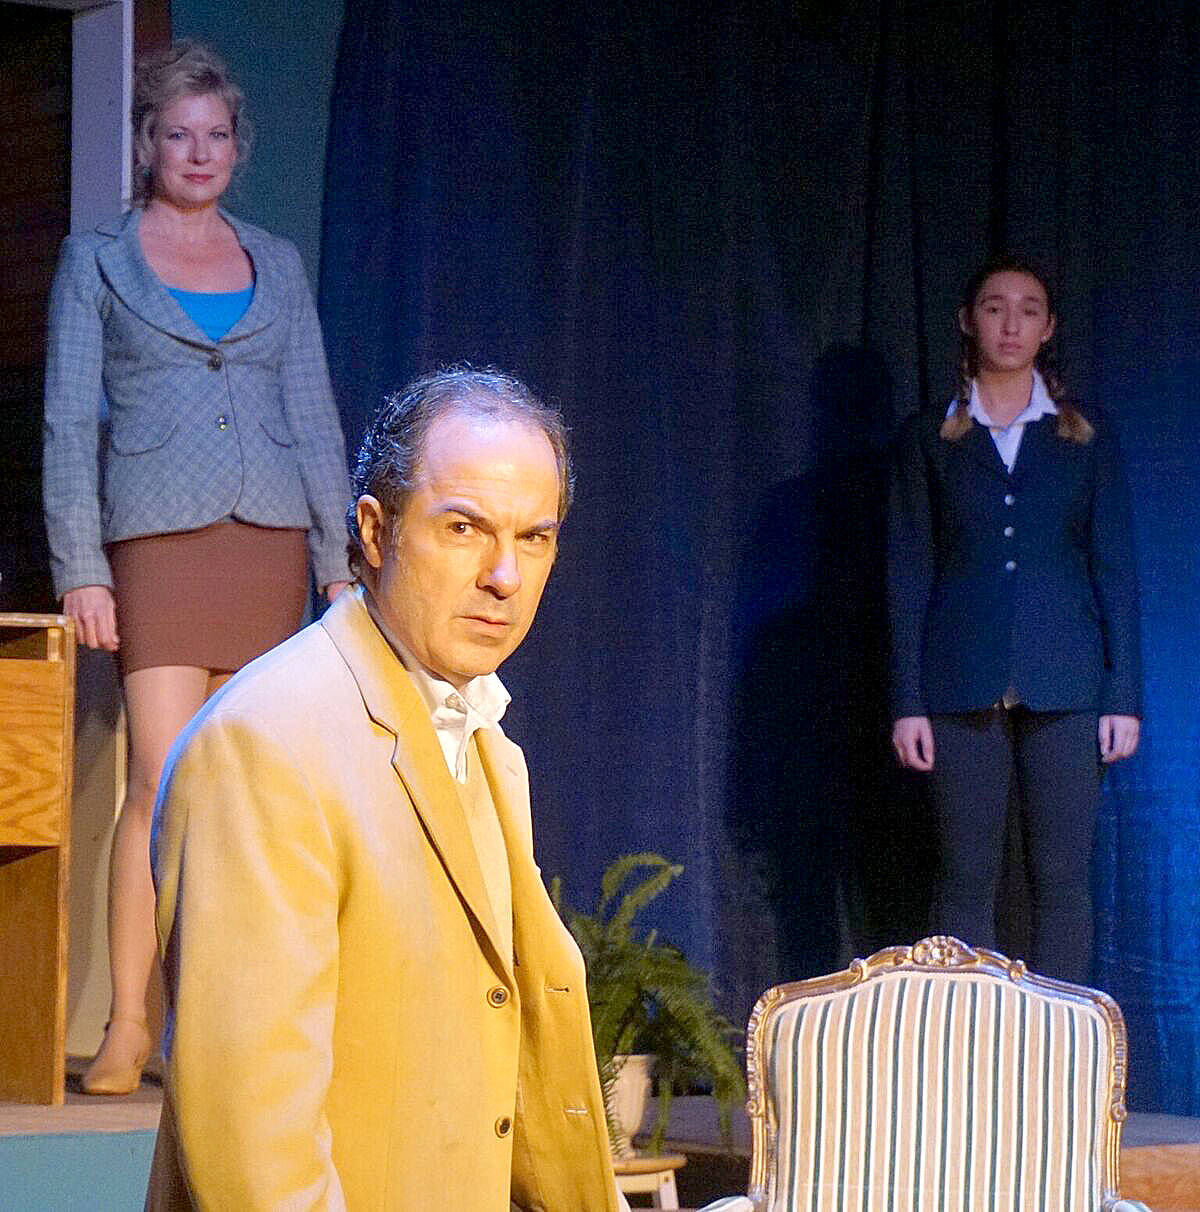 Real and imaginary women compete for Jake’s attention in a scene with Jenifer Gillis-Refenbery, left, playing Sheila, René Schuchter center, as Jake, and Bella Branson, right, as the memory of Jake’s daughter Molly at age 12. (Courtesy Photo)